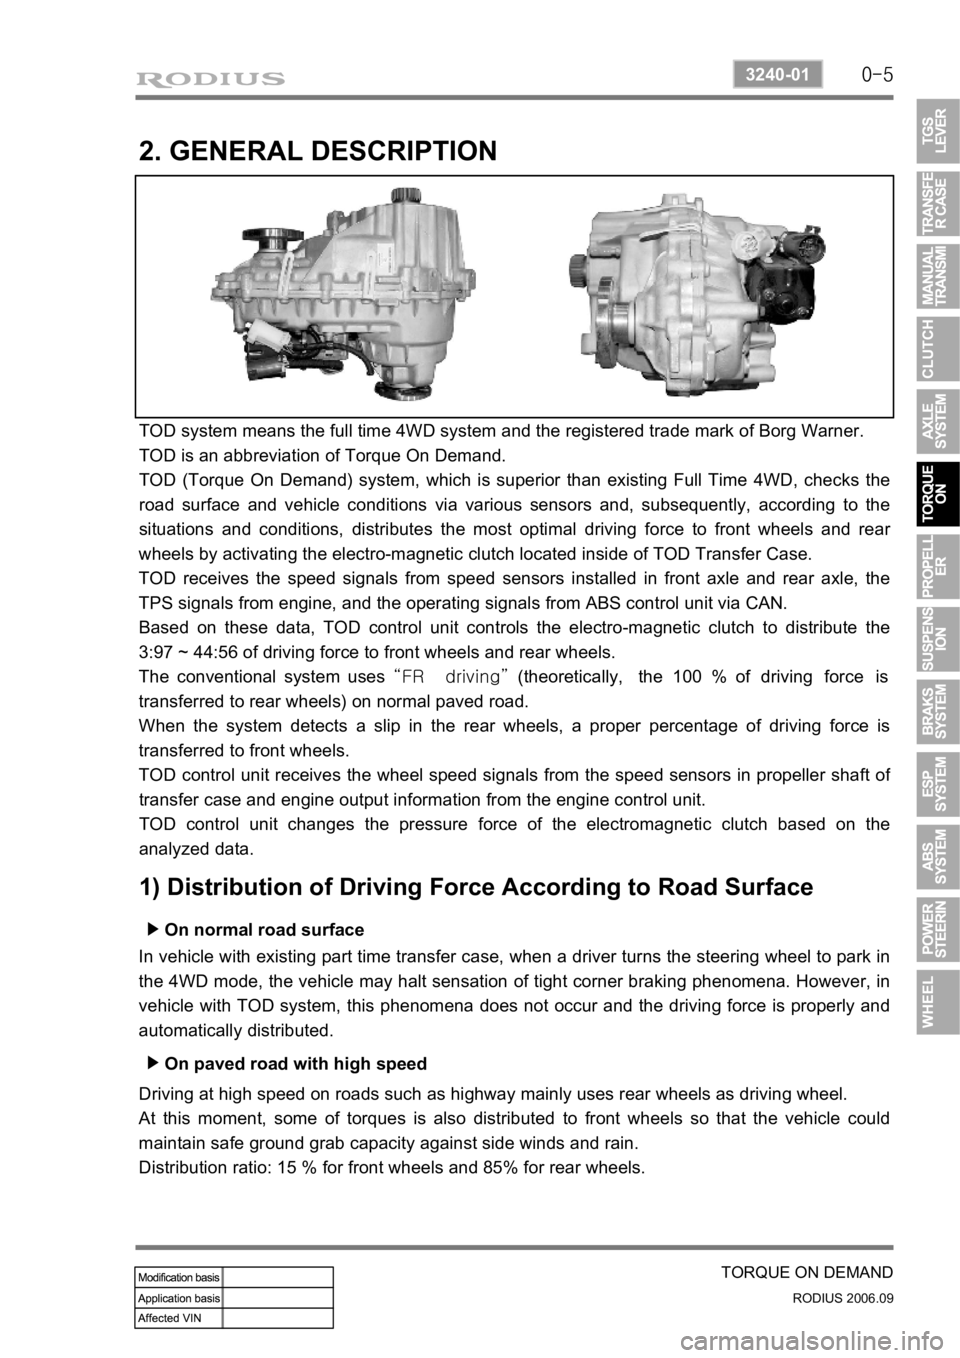 SSANGYONG RODIUS 2007  Service Manual 0-5
TORQUE ON DEMAND
RODIUS 2006.09
3240-01
2. GENERAL DESCRIPTION
TOD system means the full time 4WD system and the registered trade mark of Borg Warner. 
TOD is an abbreviation of Torque On Demand.
